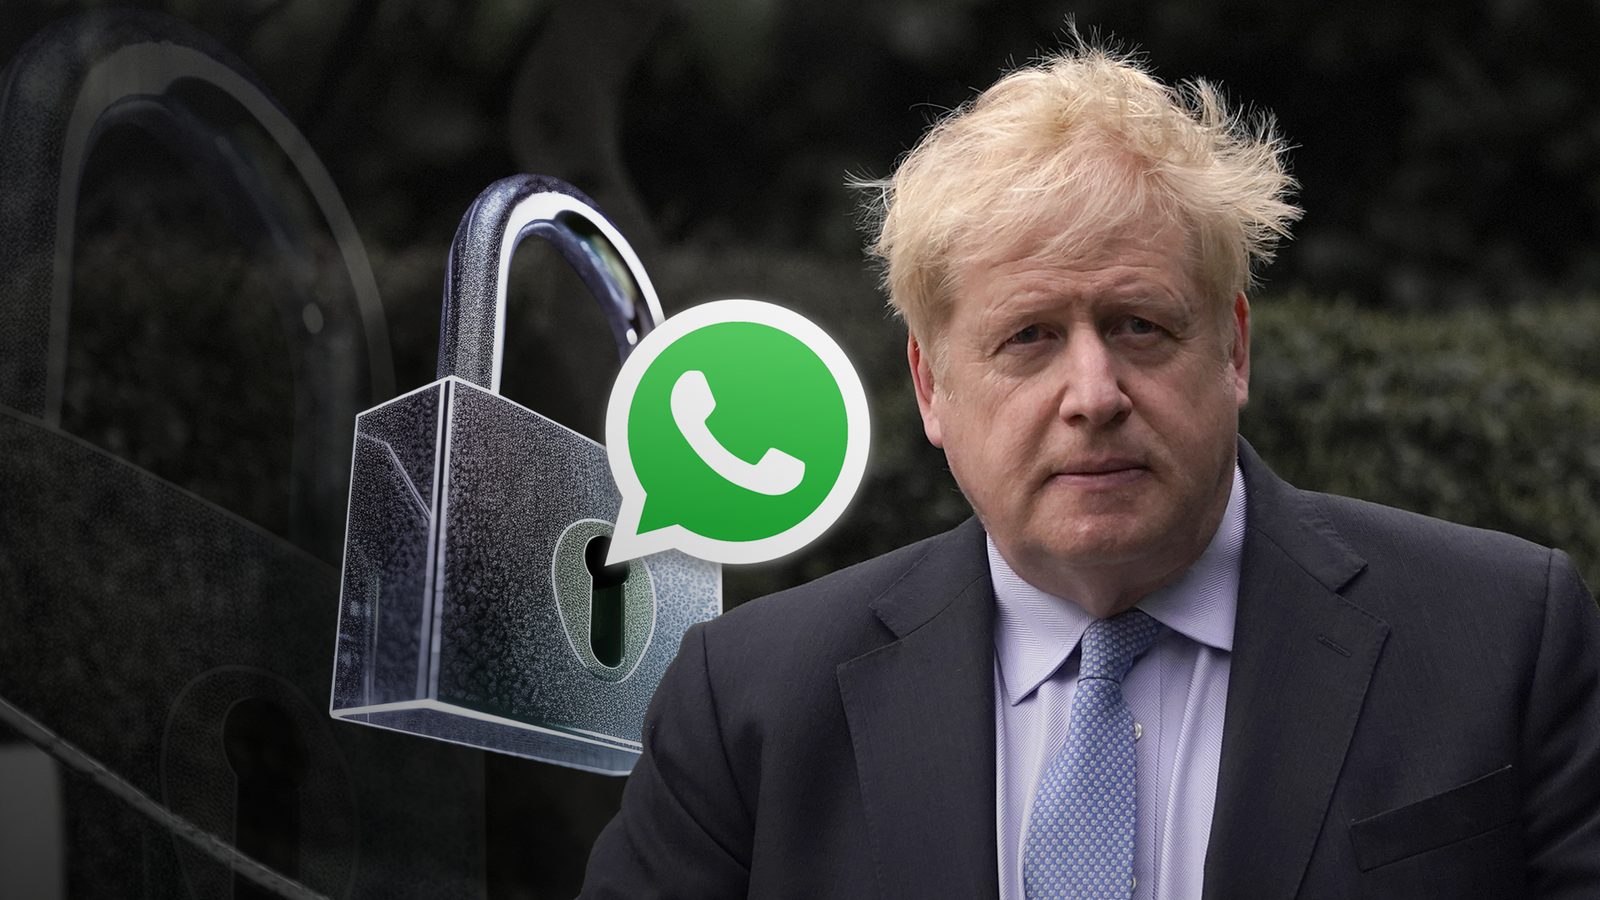 Adam Boulton: Politicians are drawn to WhatsApp - it may stop us ever knowing whole truth